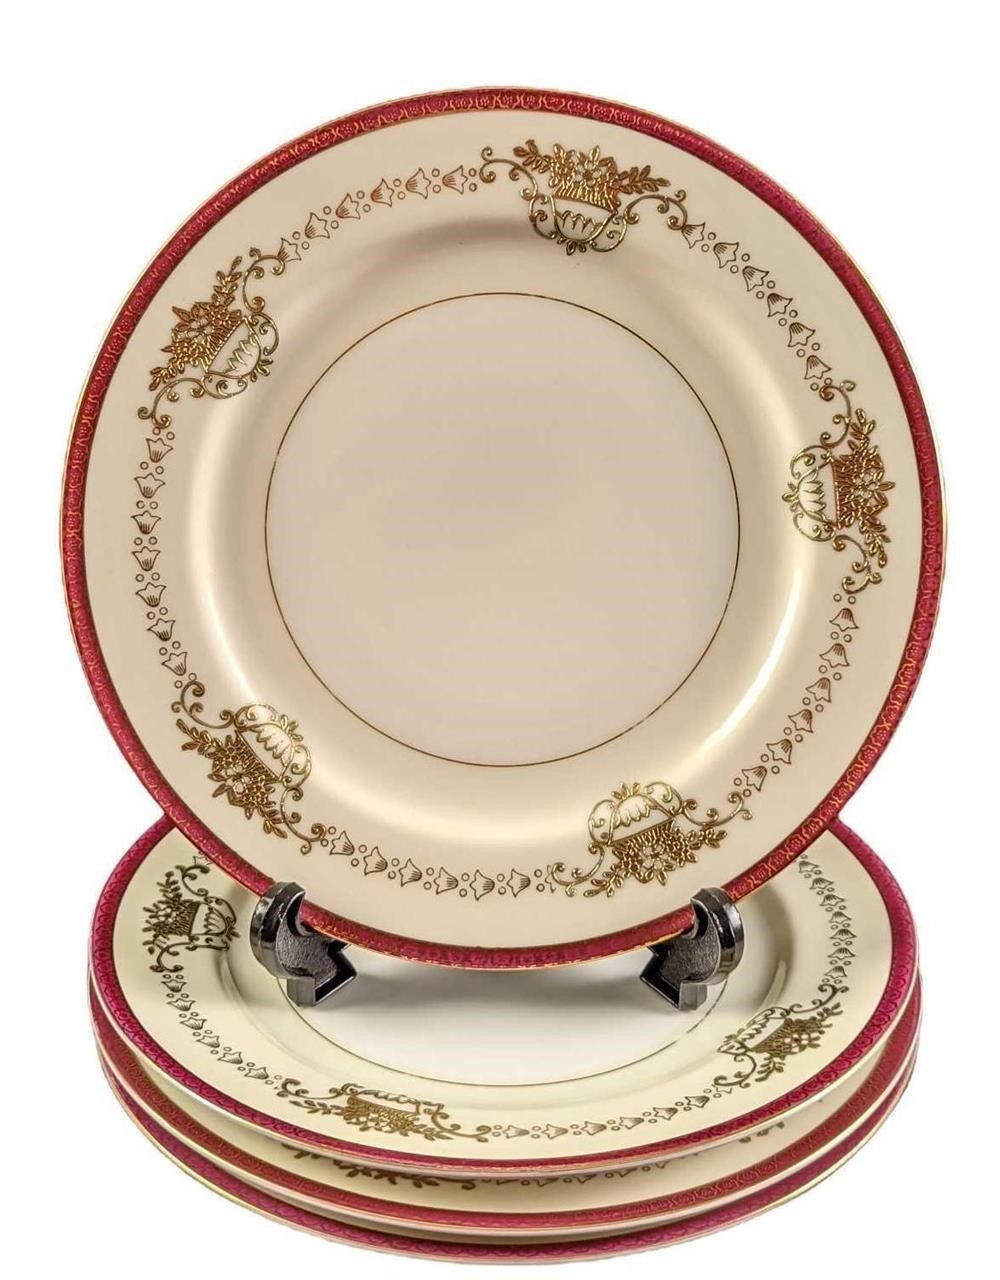 4 China Maroon Trim With Gold Inlay Dinner Plates